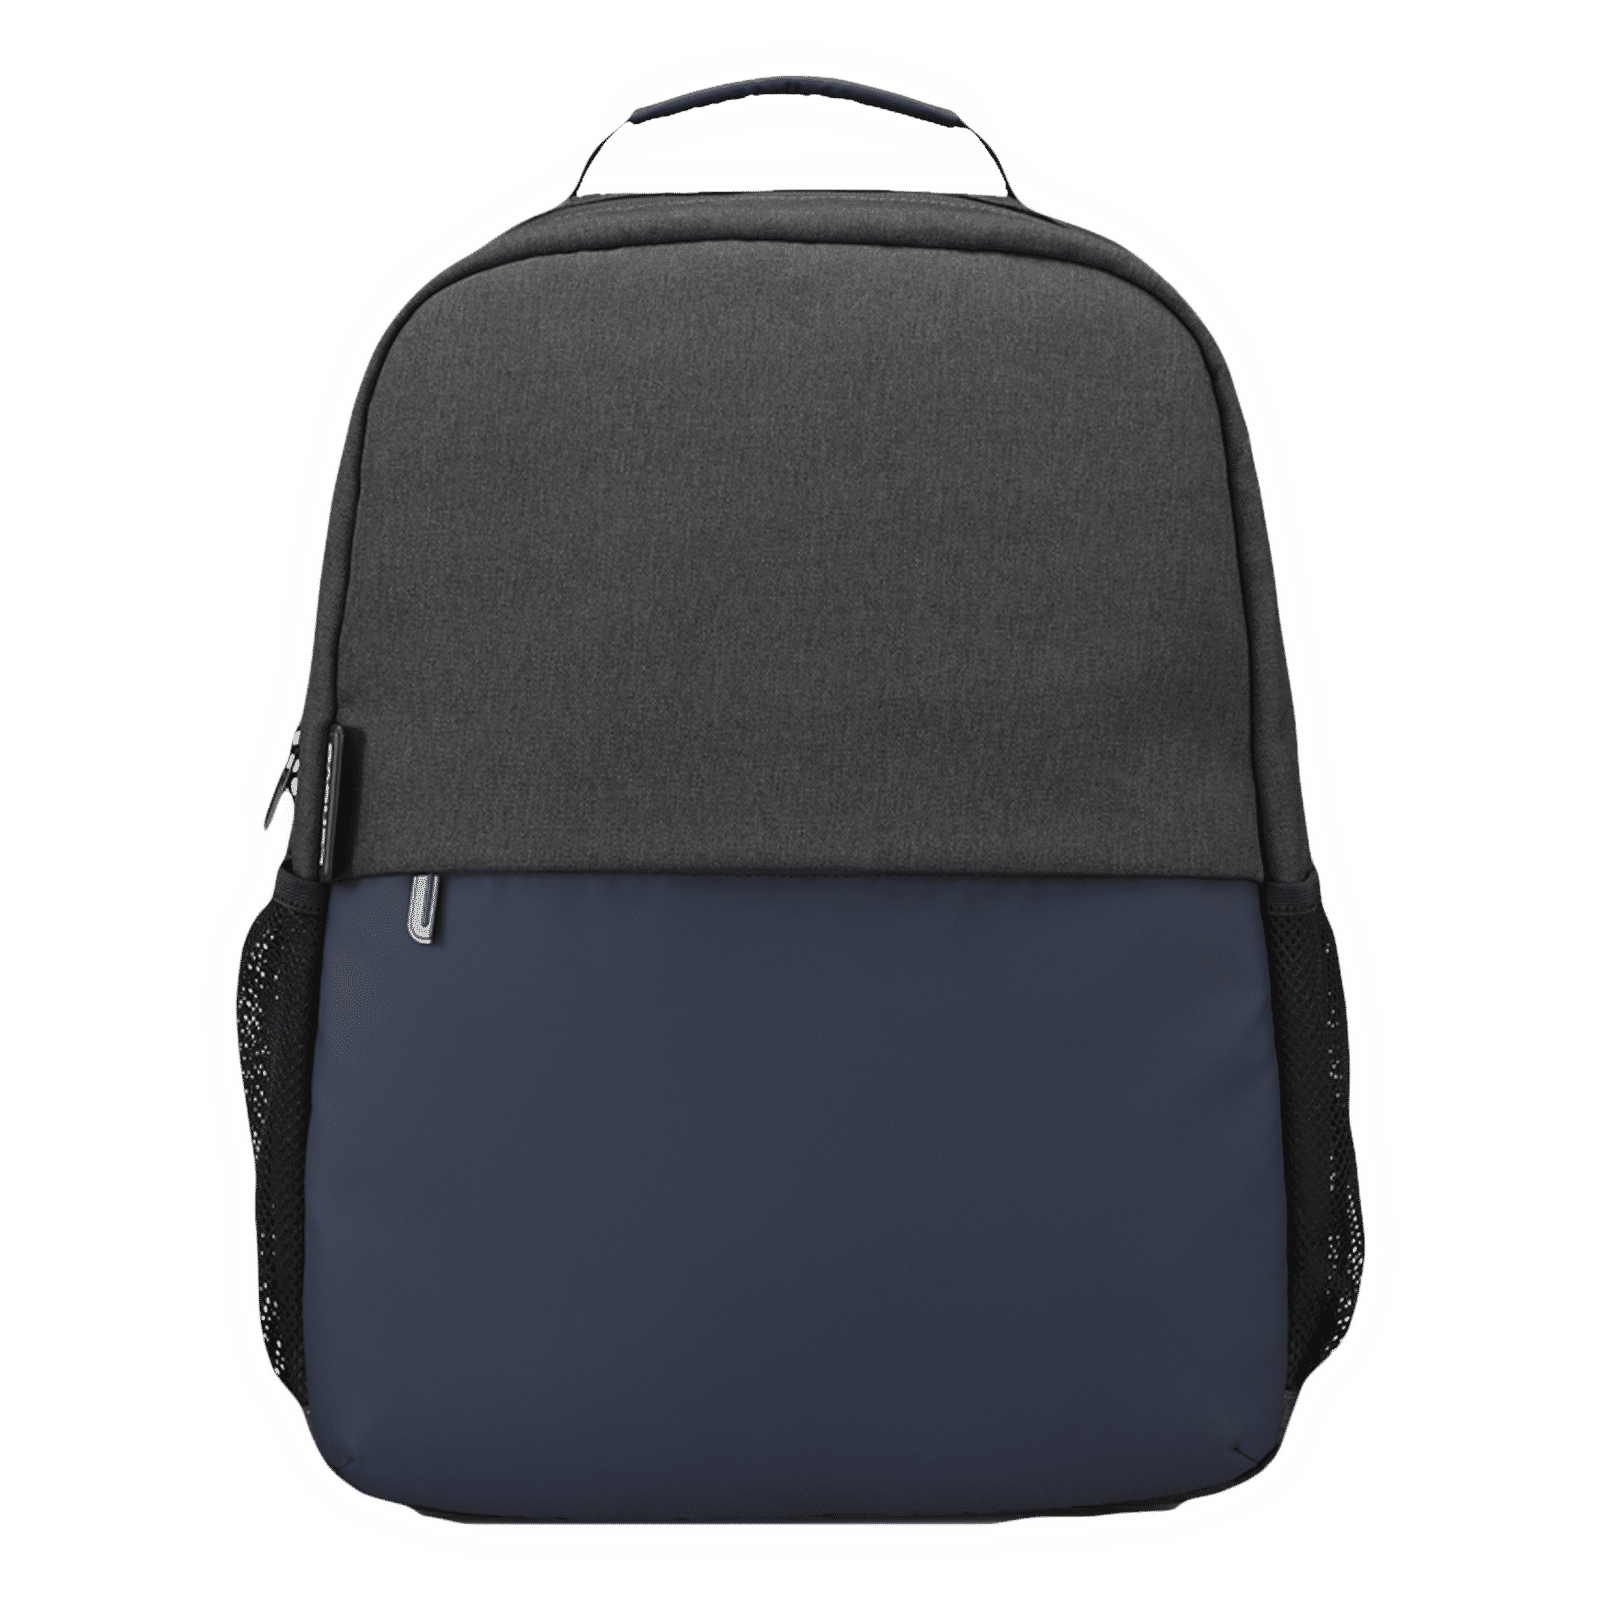 CROMA Unisex-adult Laptop Messenger Bag (Crpcb6105ssd01, Black) :  Amazon.in: Computers & Accessories